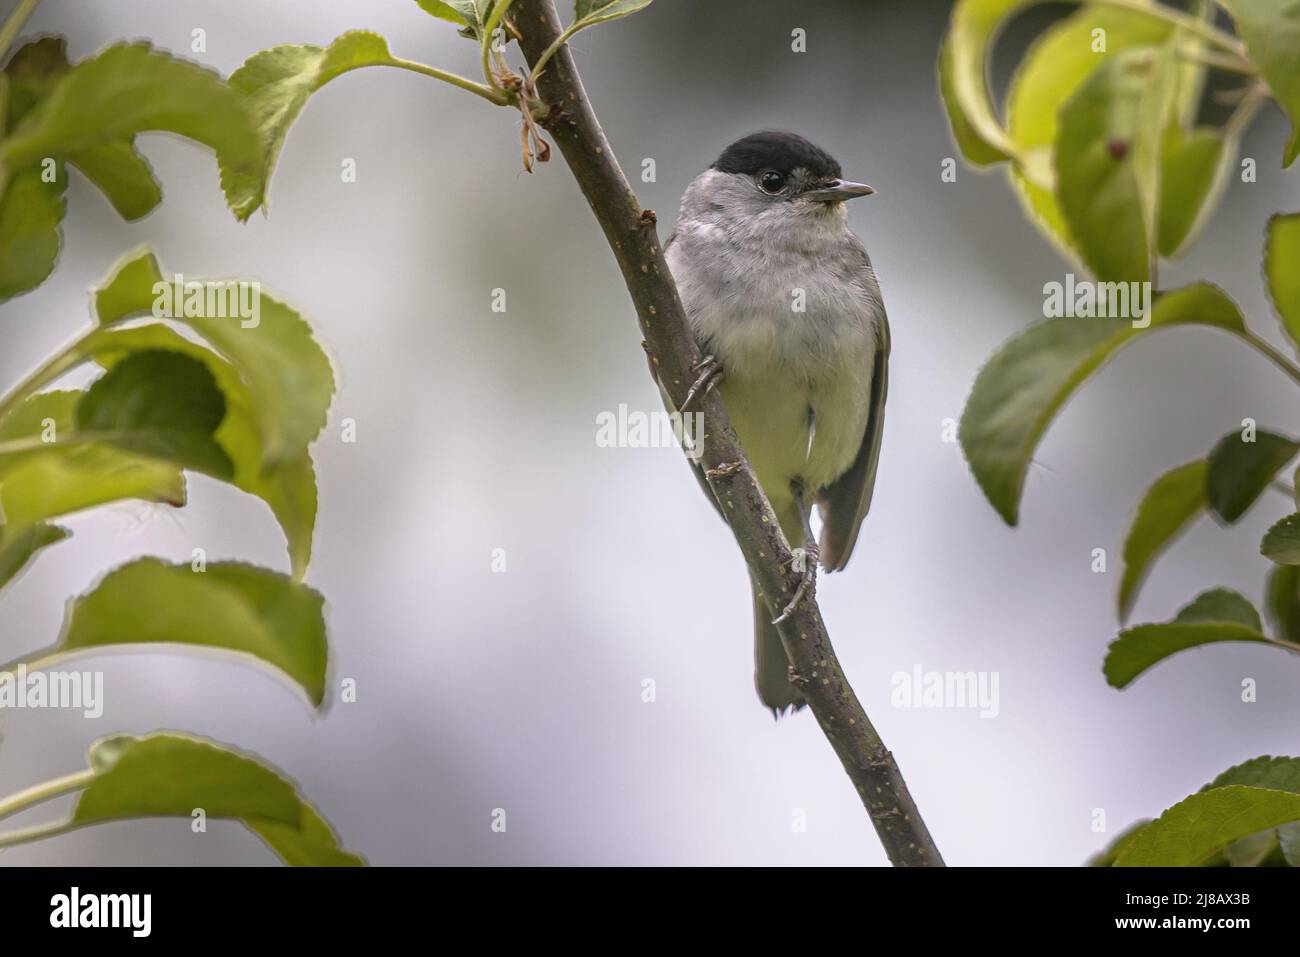 Male Blackcap (Sylvia atricapilla) Perched on a branch against a blurred background Stock Photo